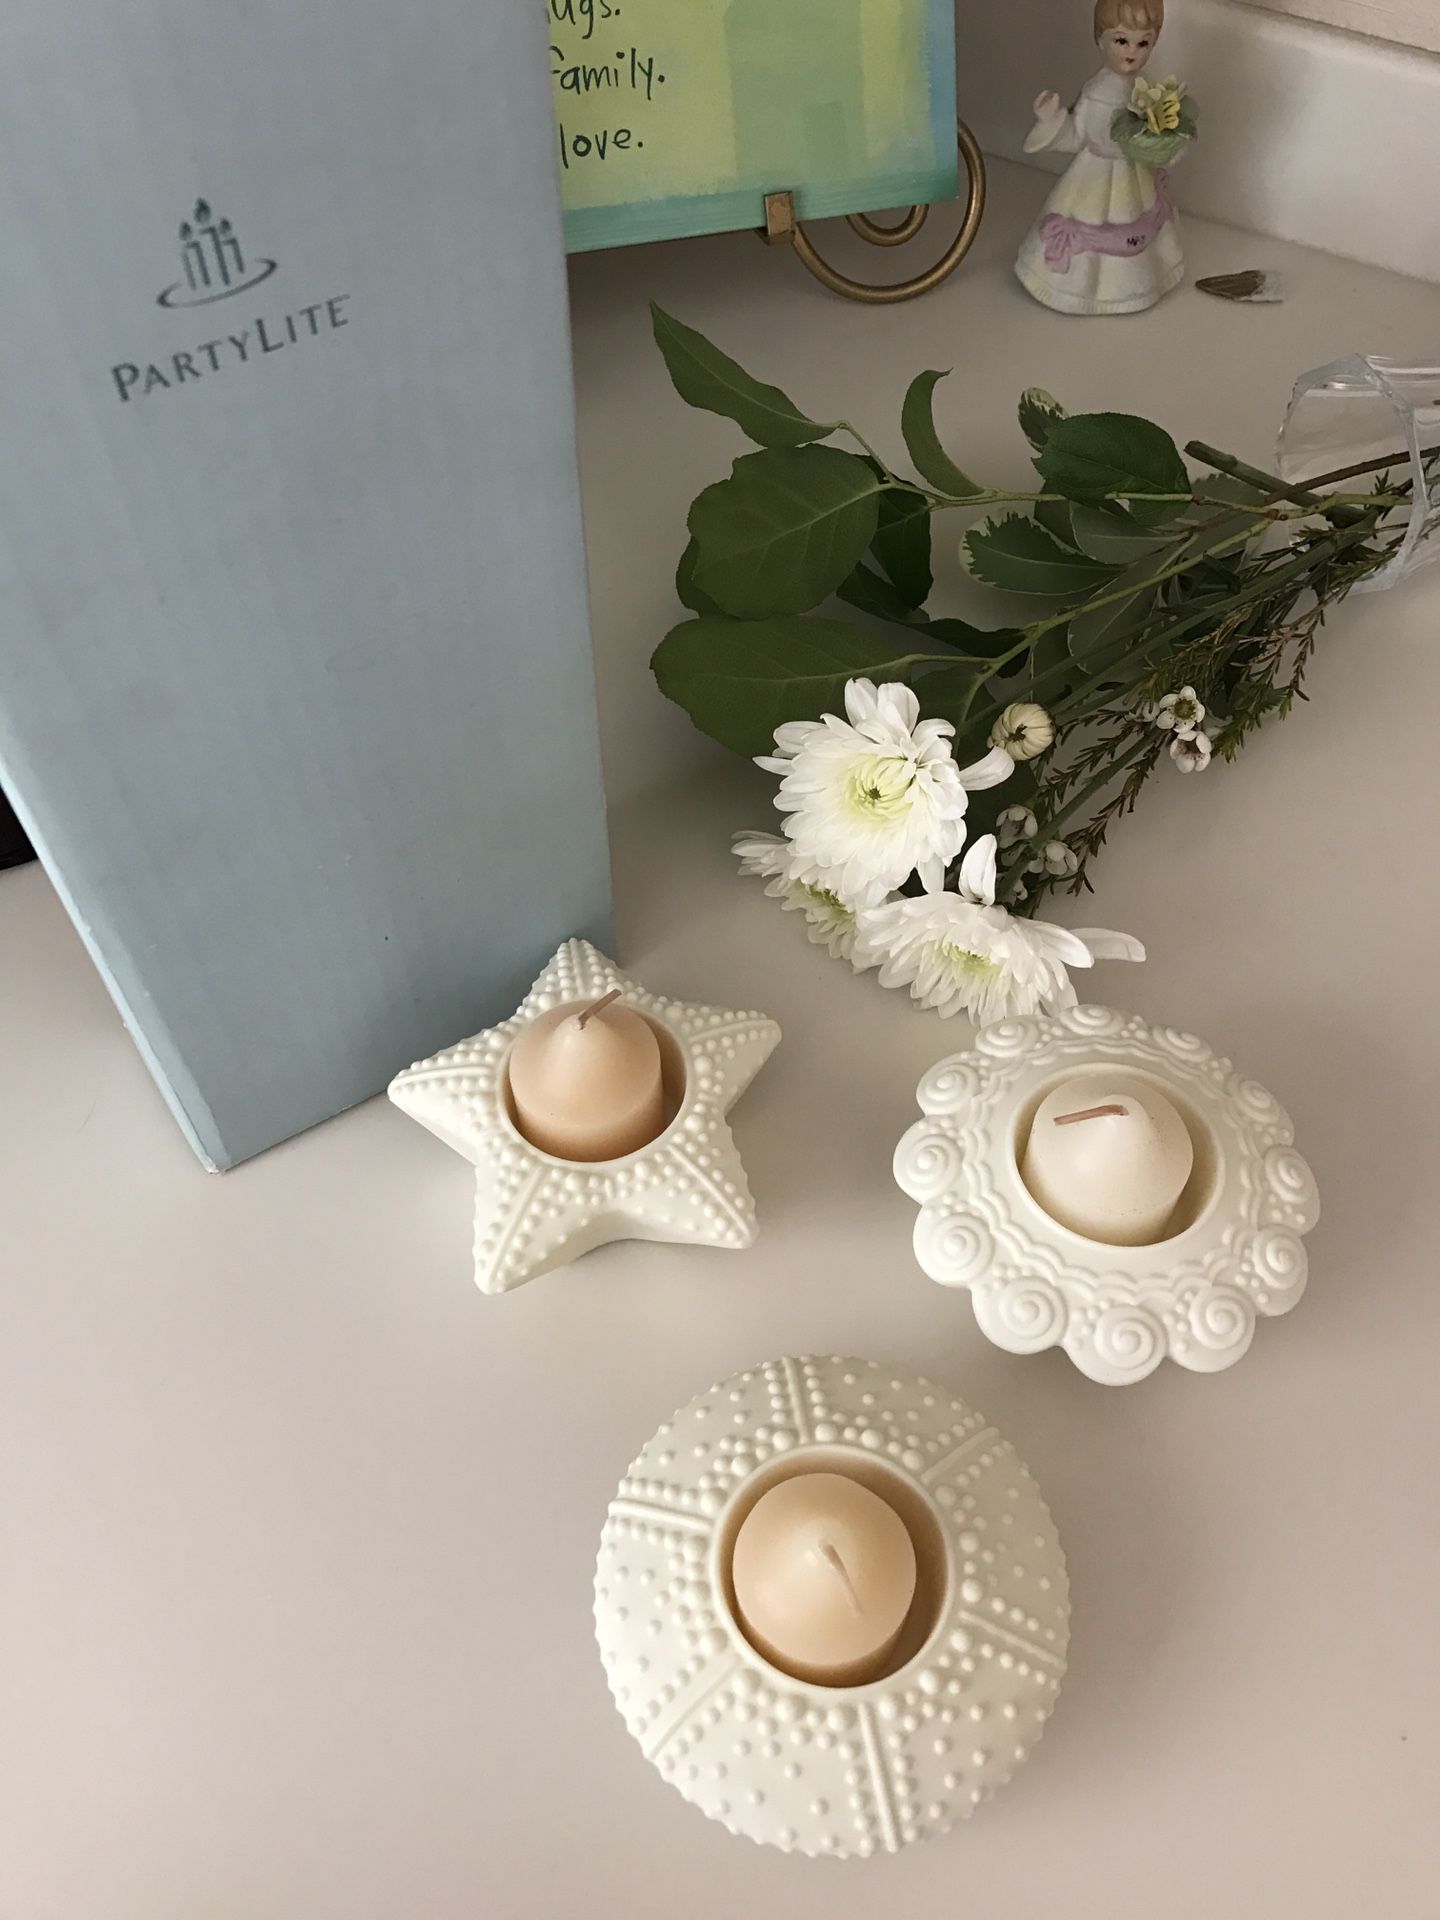 PartyLite Set NEW IN BOX